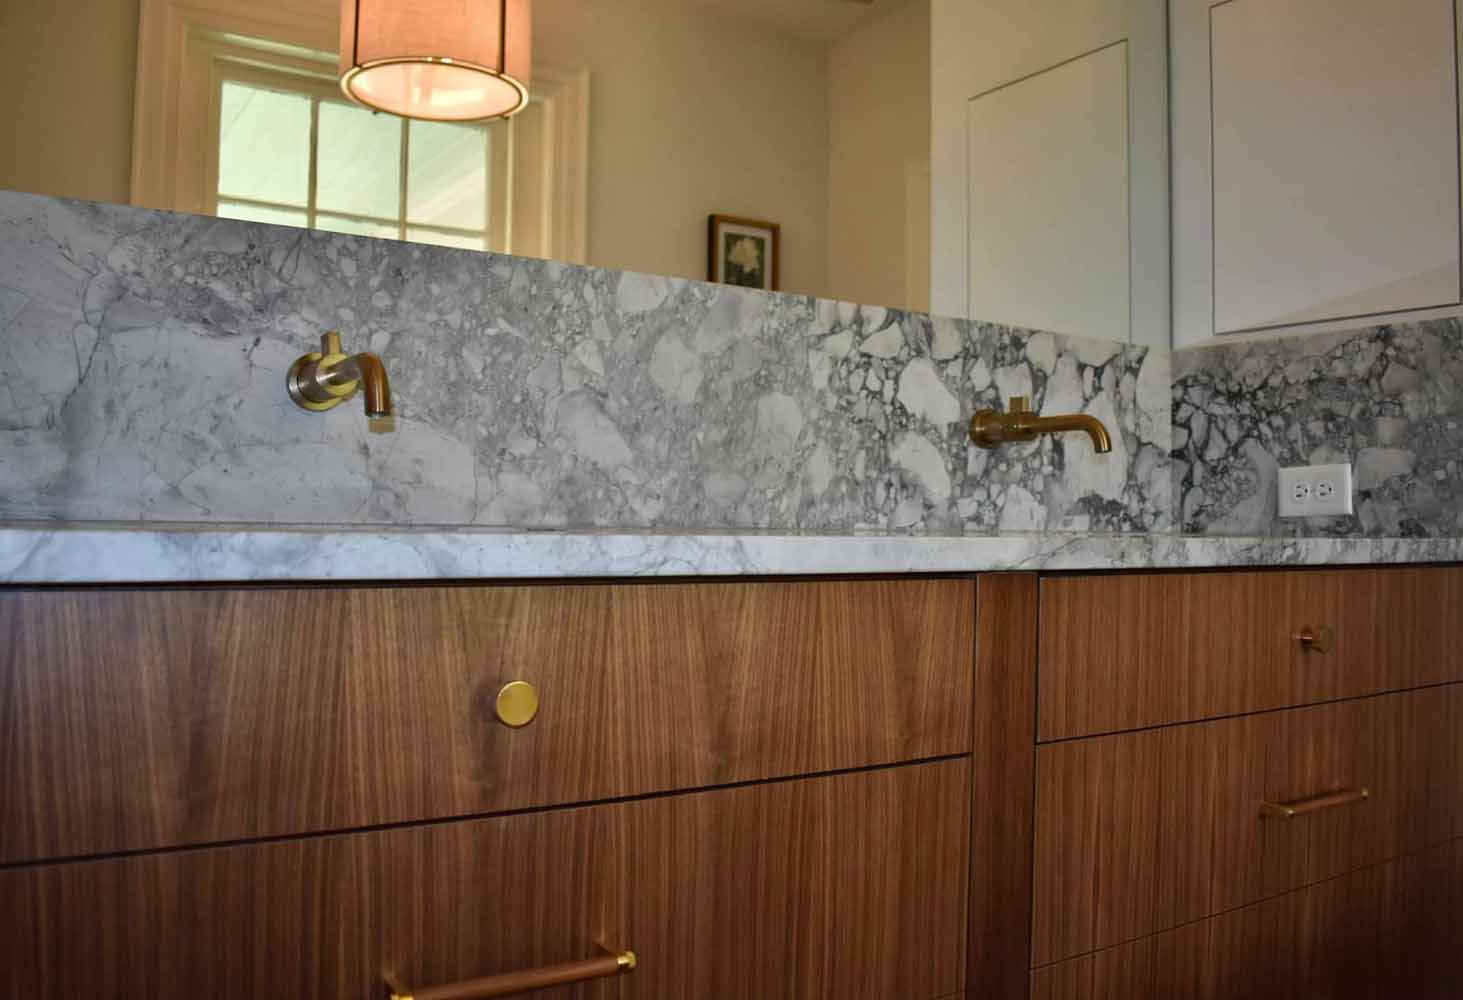 BK Martin bathroom featuring a wood double vanity and marble counter with matching backsplash